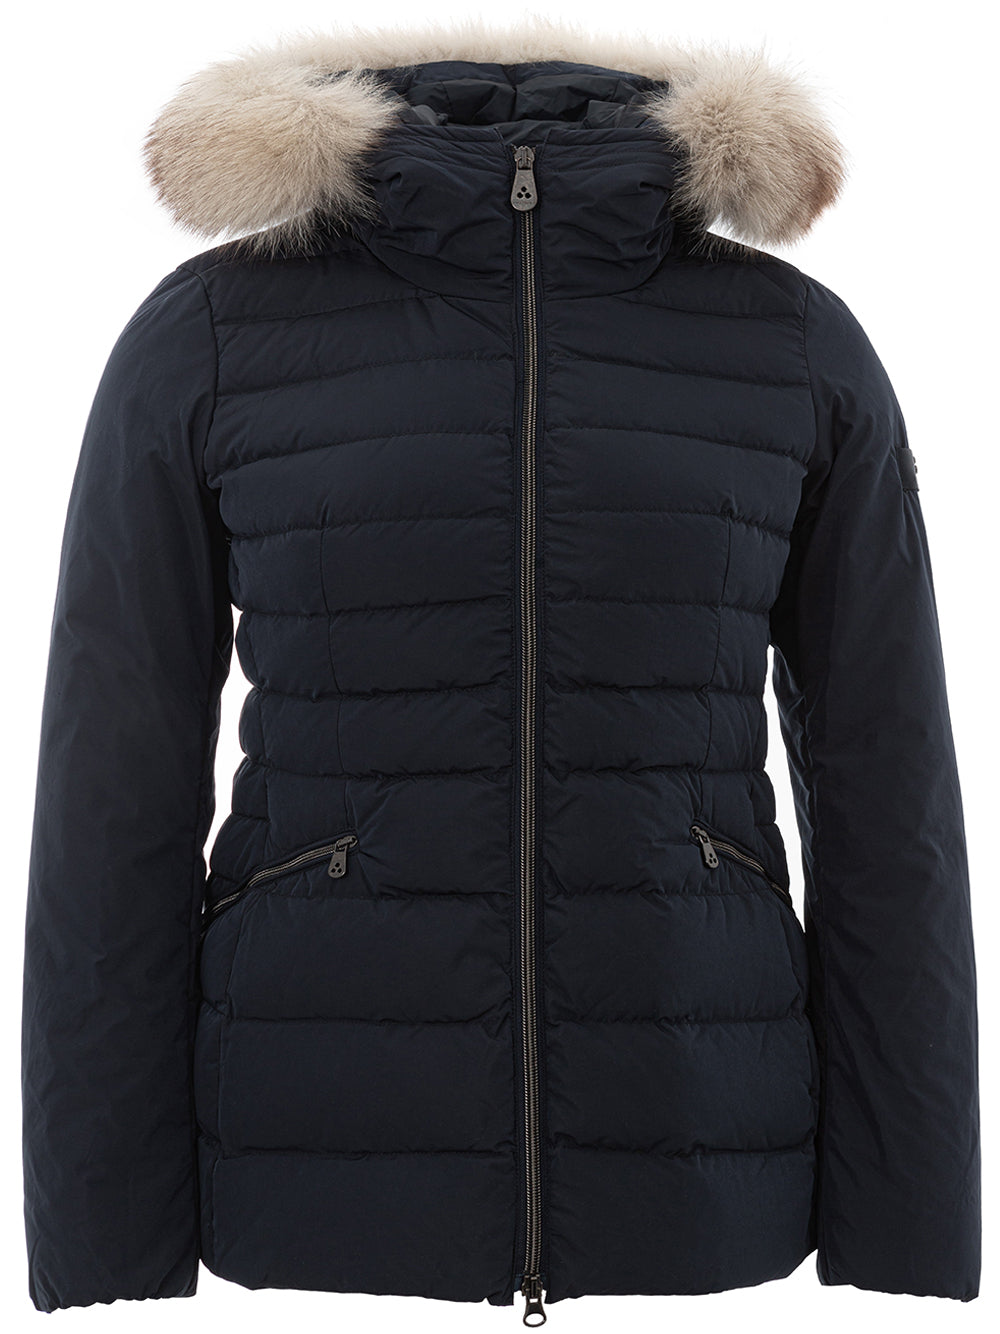 Blue Padded Jacket with Fur Collar Peuterey